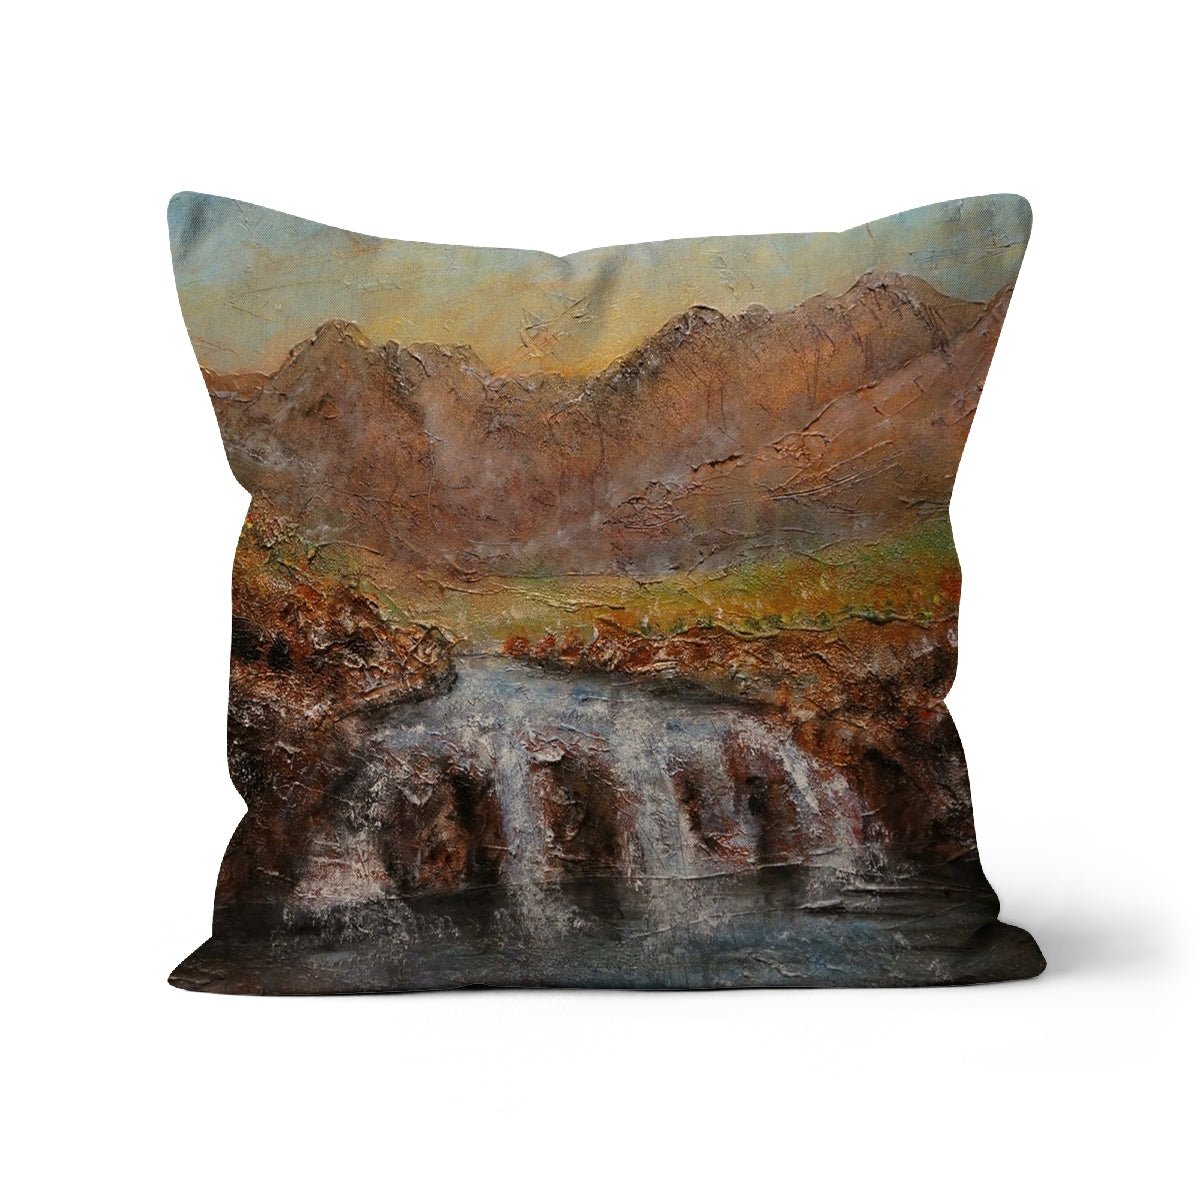 Fairy Pools Dawn Skye Art Gifts Cushion-Cushions-Skye Art Gallery-Canvas-22"x22"-Paintings, Prints, Homeware, Art Gifts From Scotland By Scottish Artist Kevin Hunter